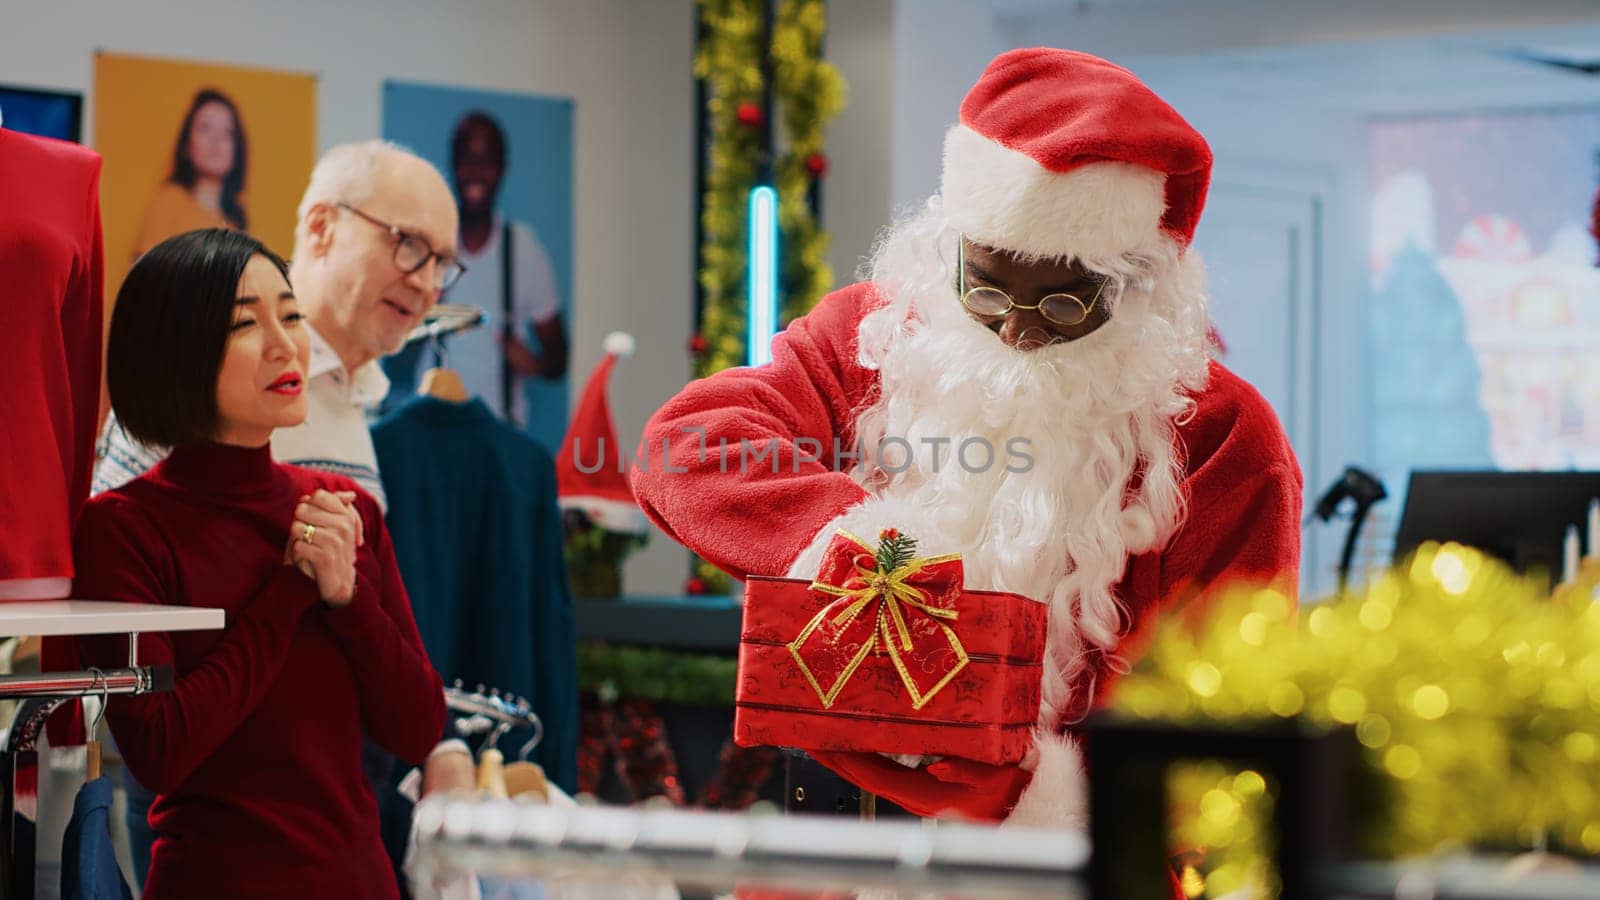 Worker wearing Santa Claus outfit in xmas ornate clothing store, inviting customers to participate in Christmas raffle competition in order to win promotional prize during festive holiday season